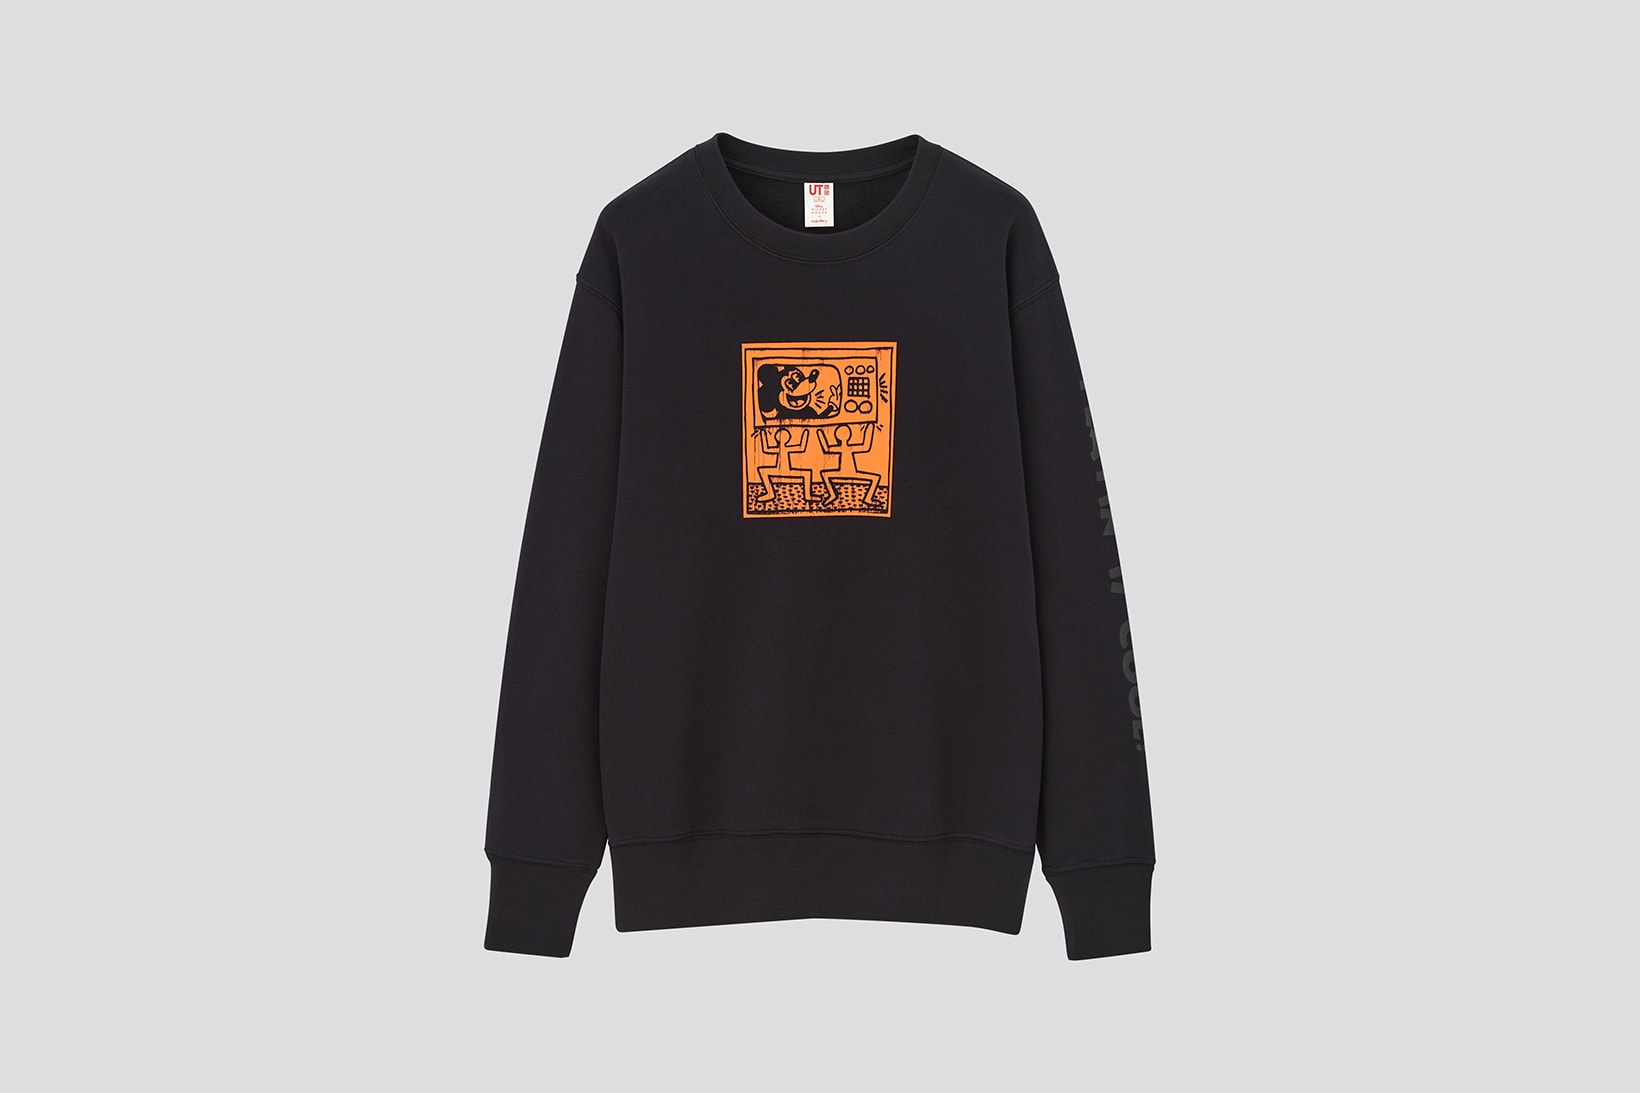 Disney Mickey Mouse x Keith Haring x UNIQLO UT Collaboration Collection Sweatshirt Sweater Black White